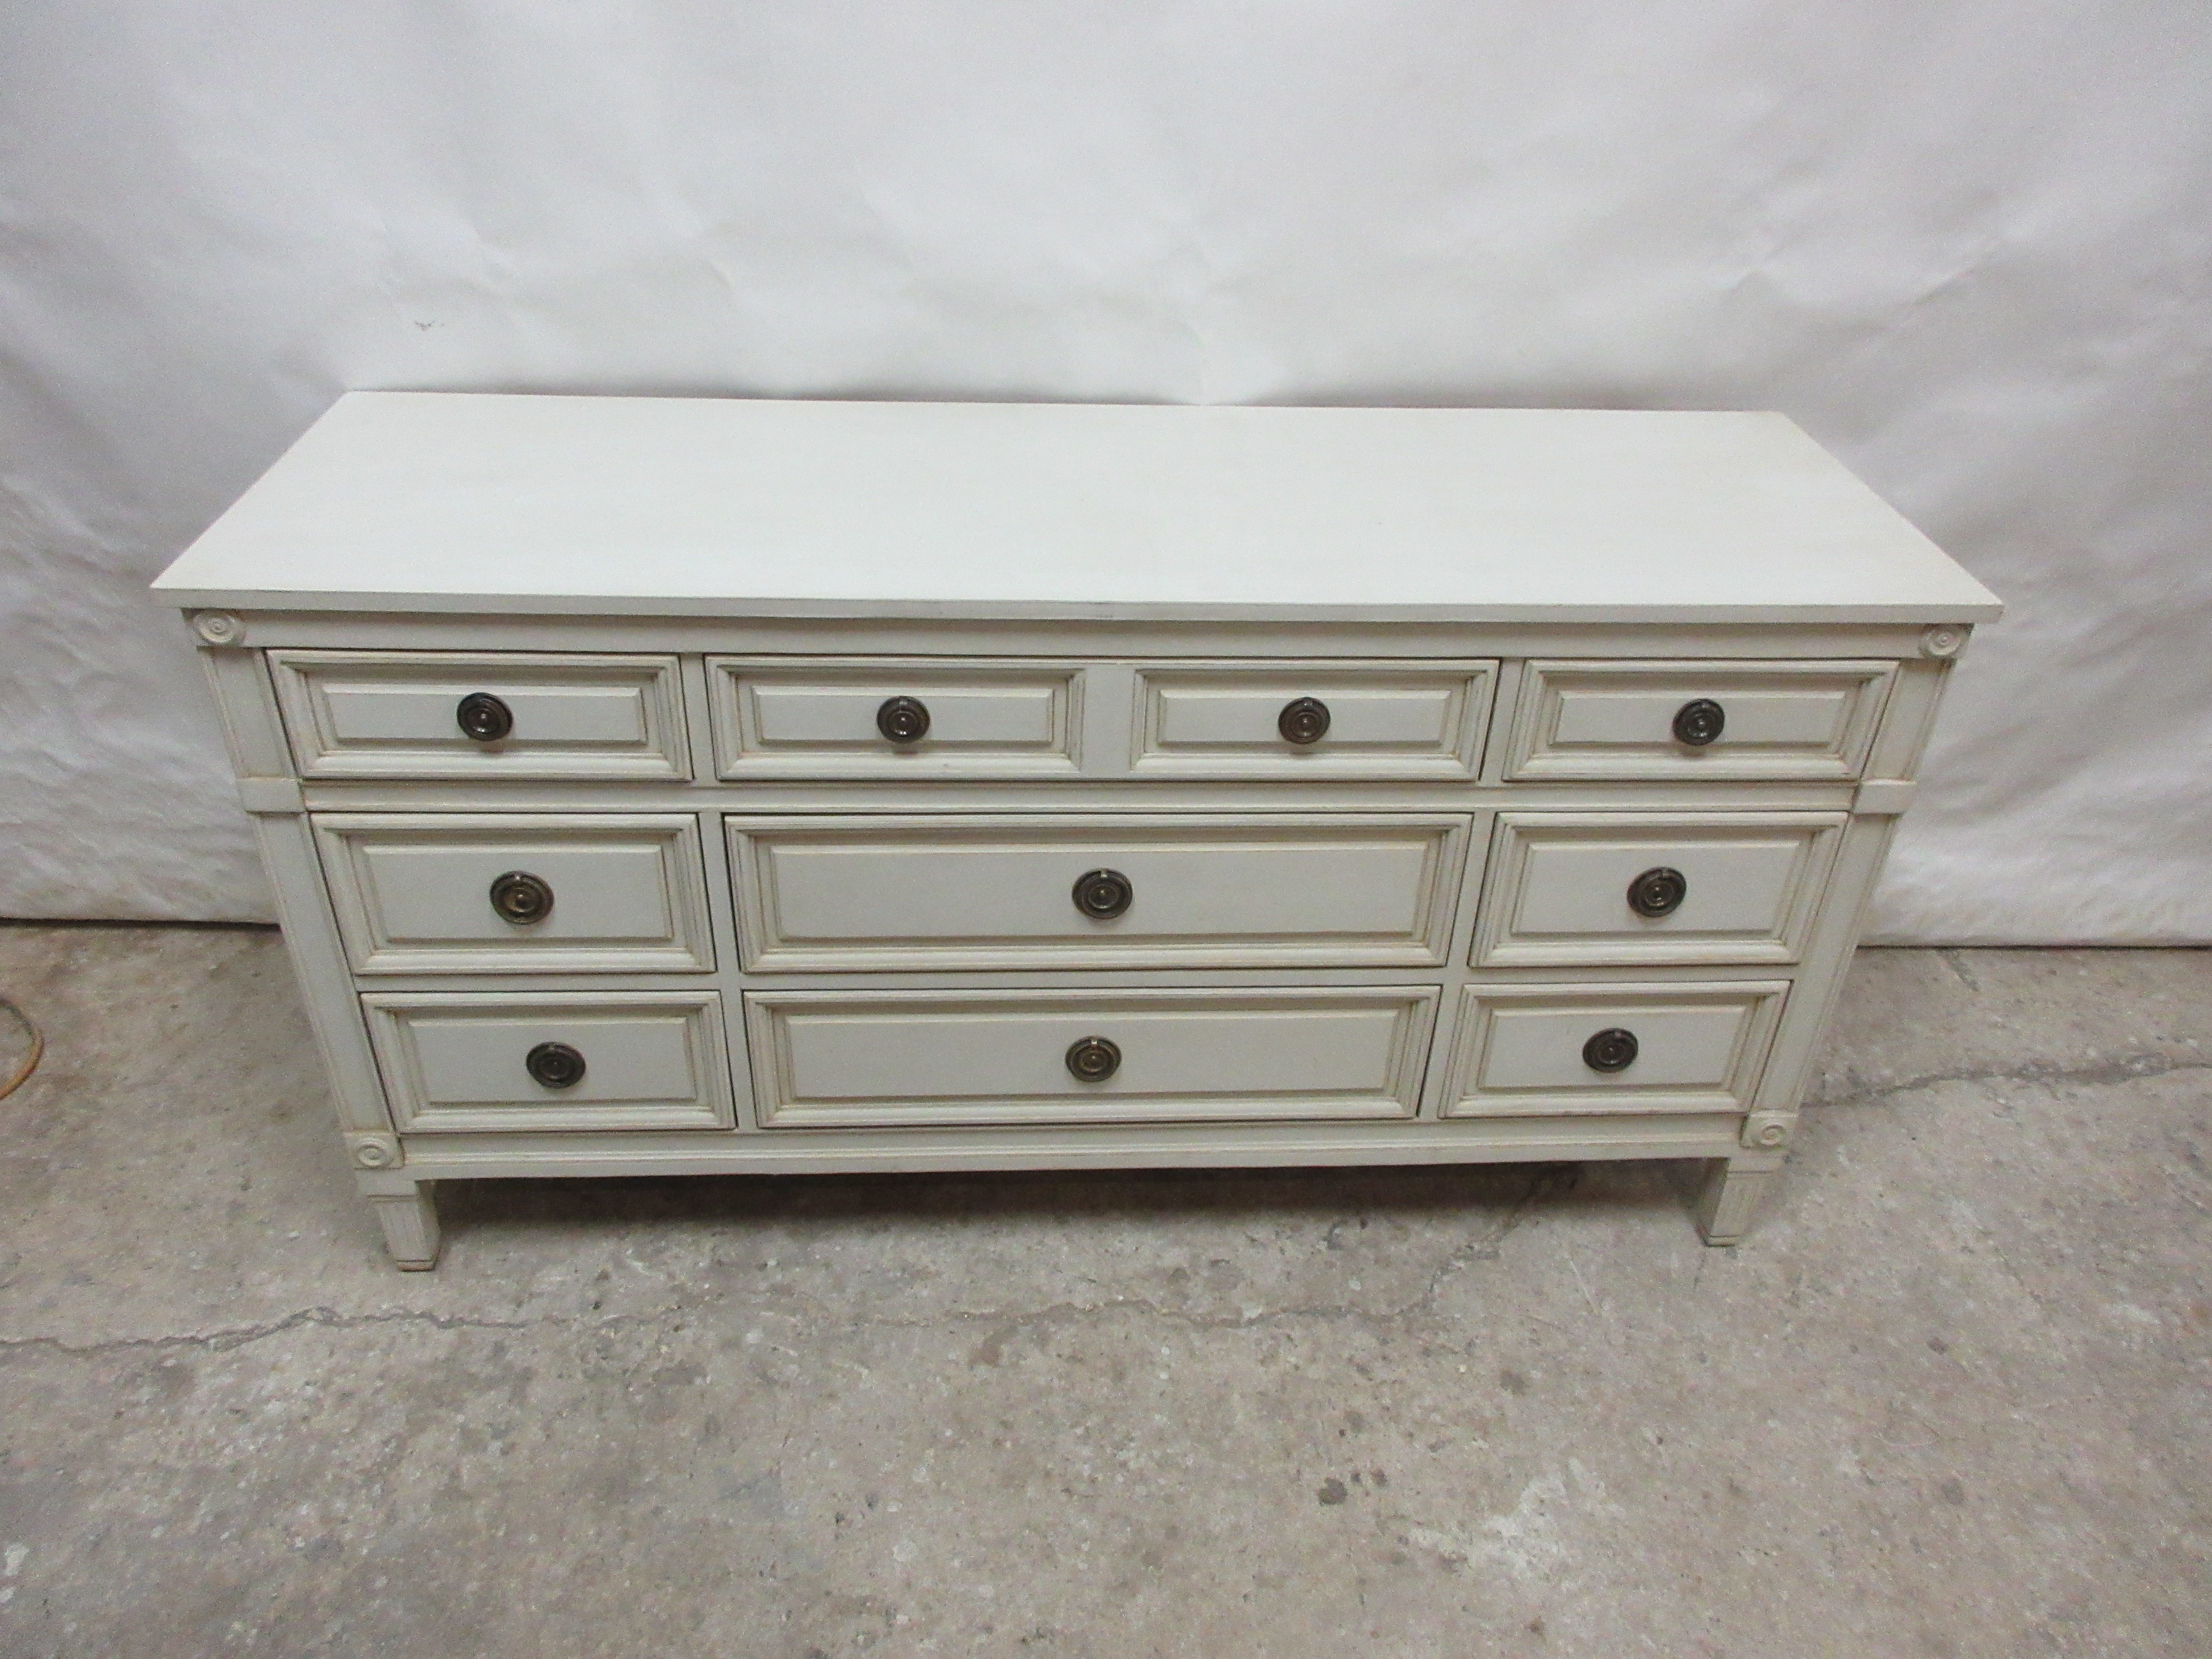 This is a unique Gustavian style 9 drawer dresser, its been restored and repainted with Milk paints 